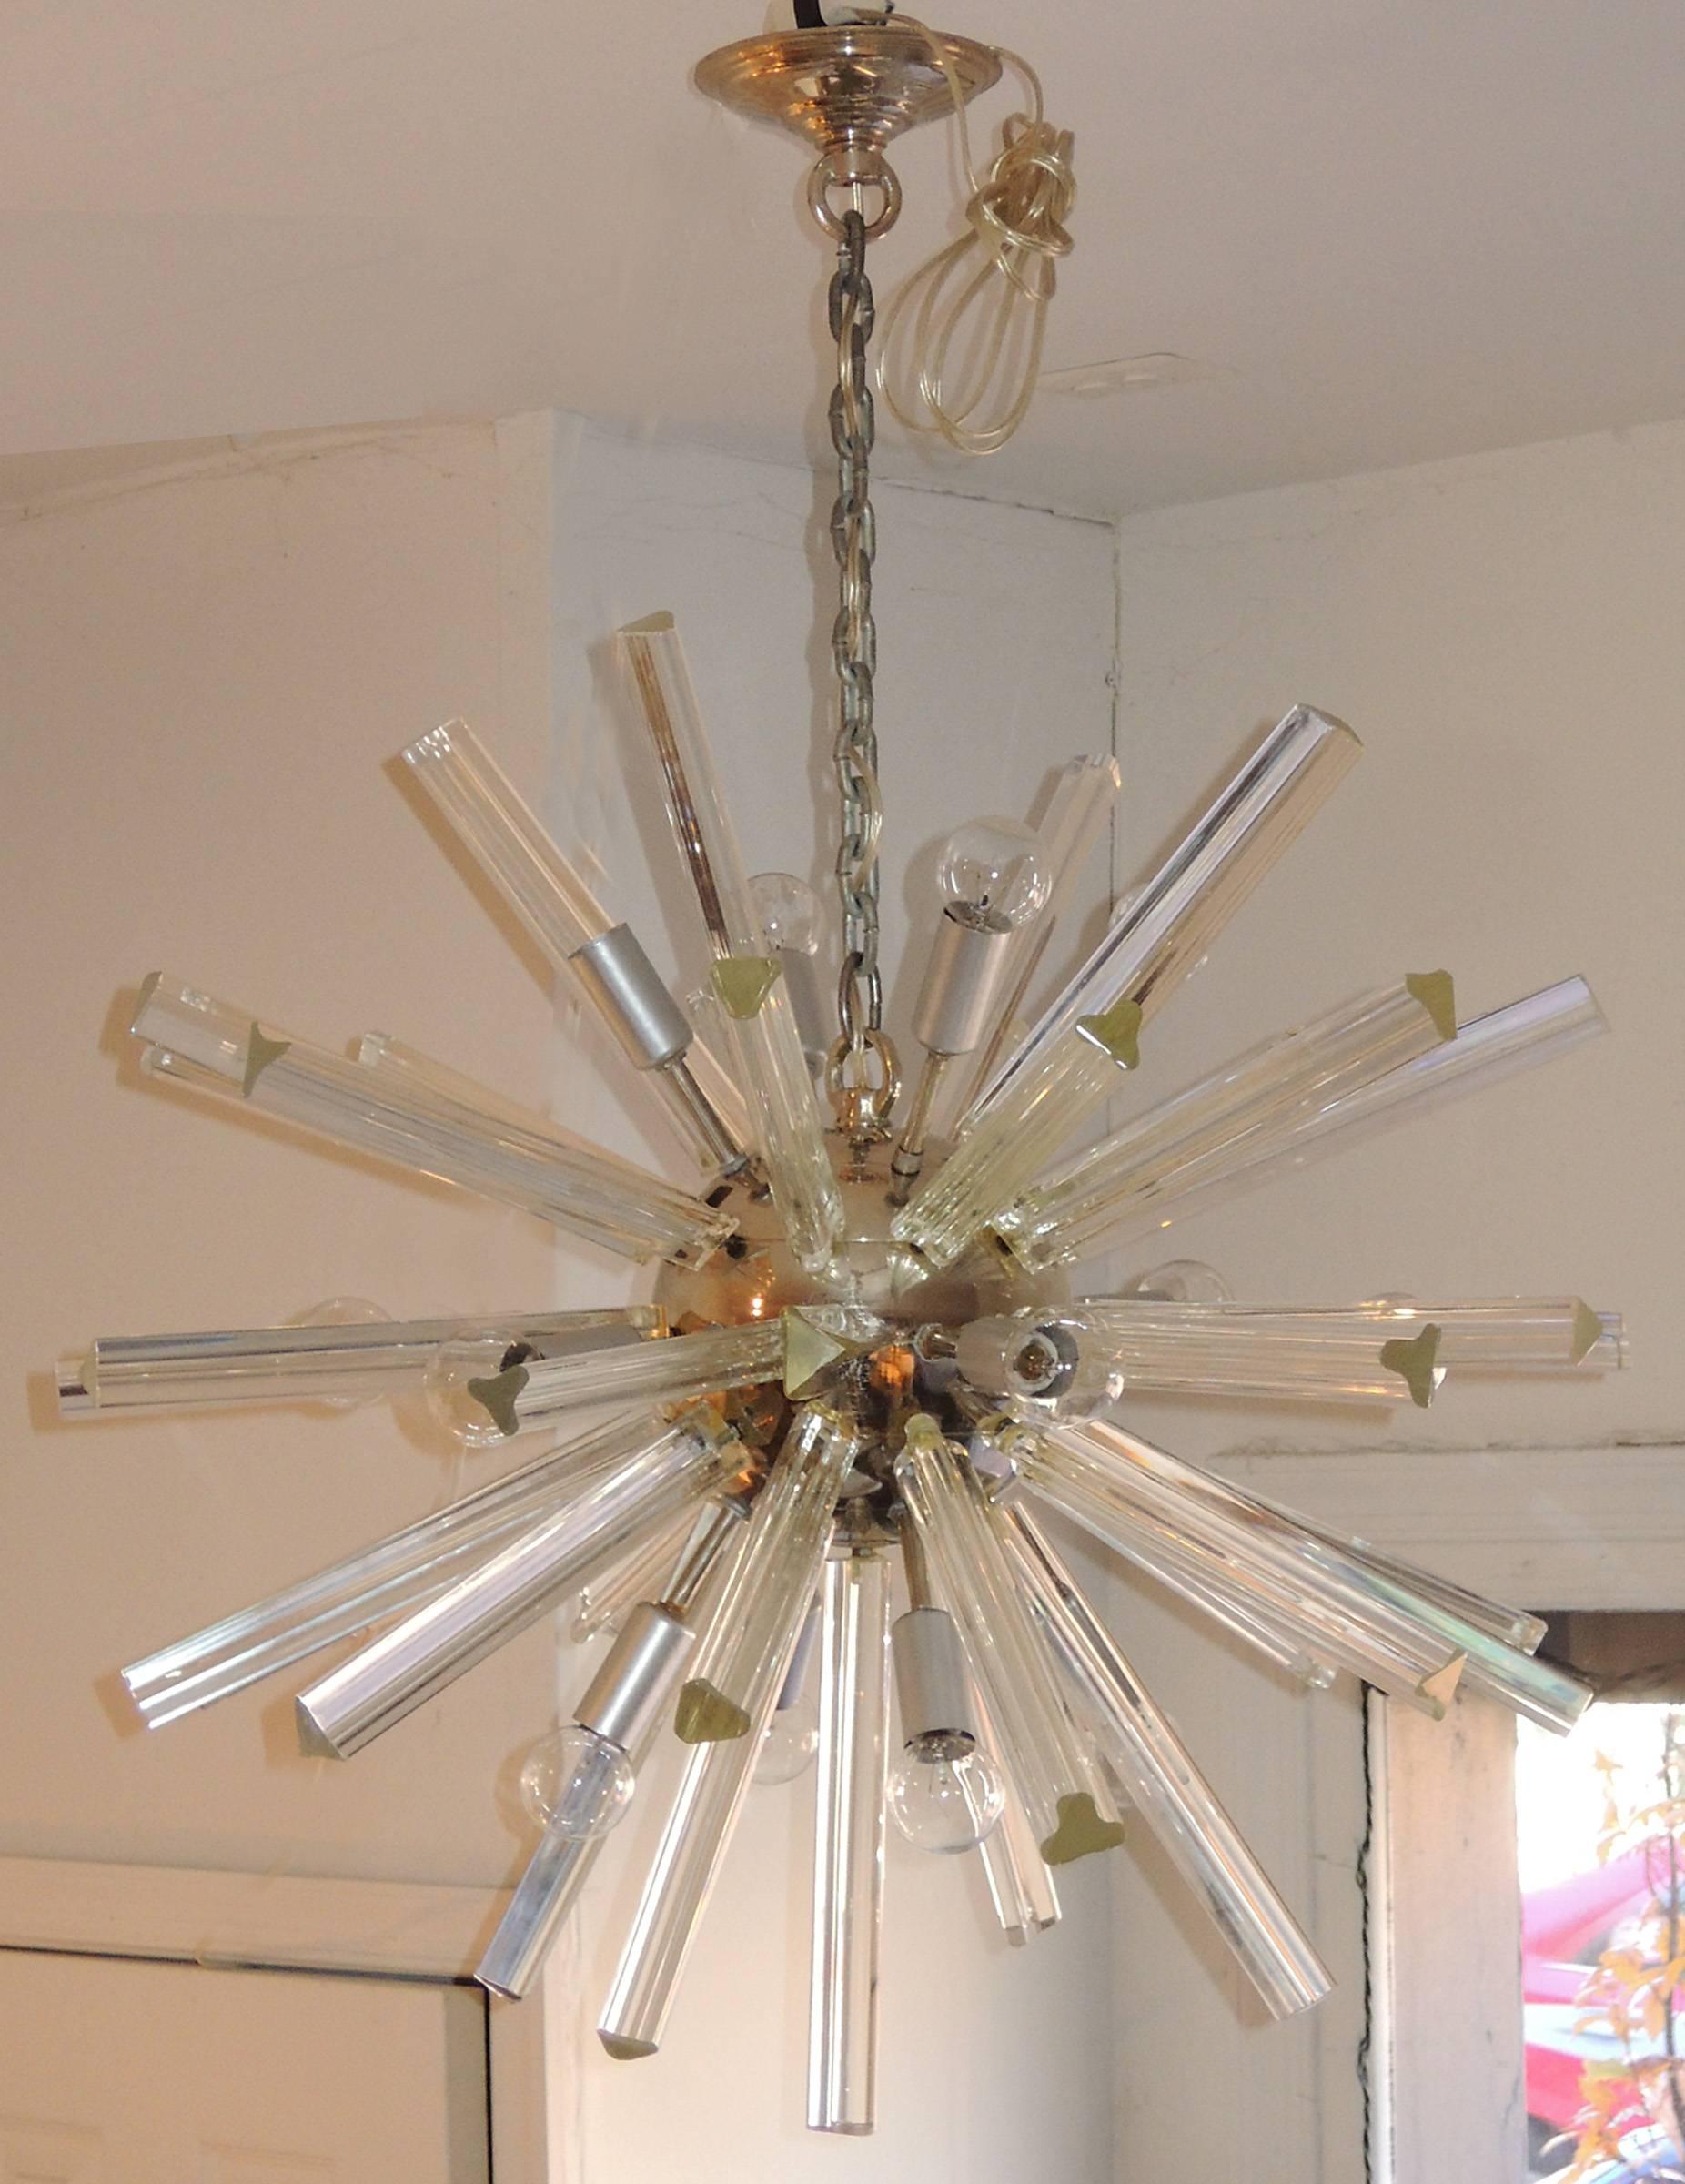 Period mid-century modern fixture with multiple Murano triedri glass rods emanating from a small polished chrome orb.
